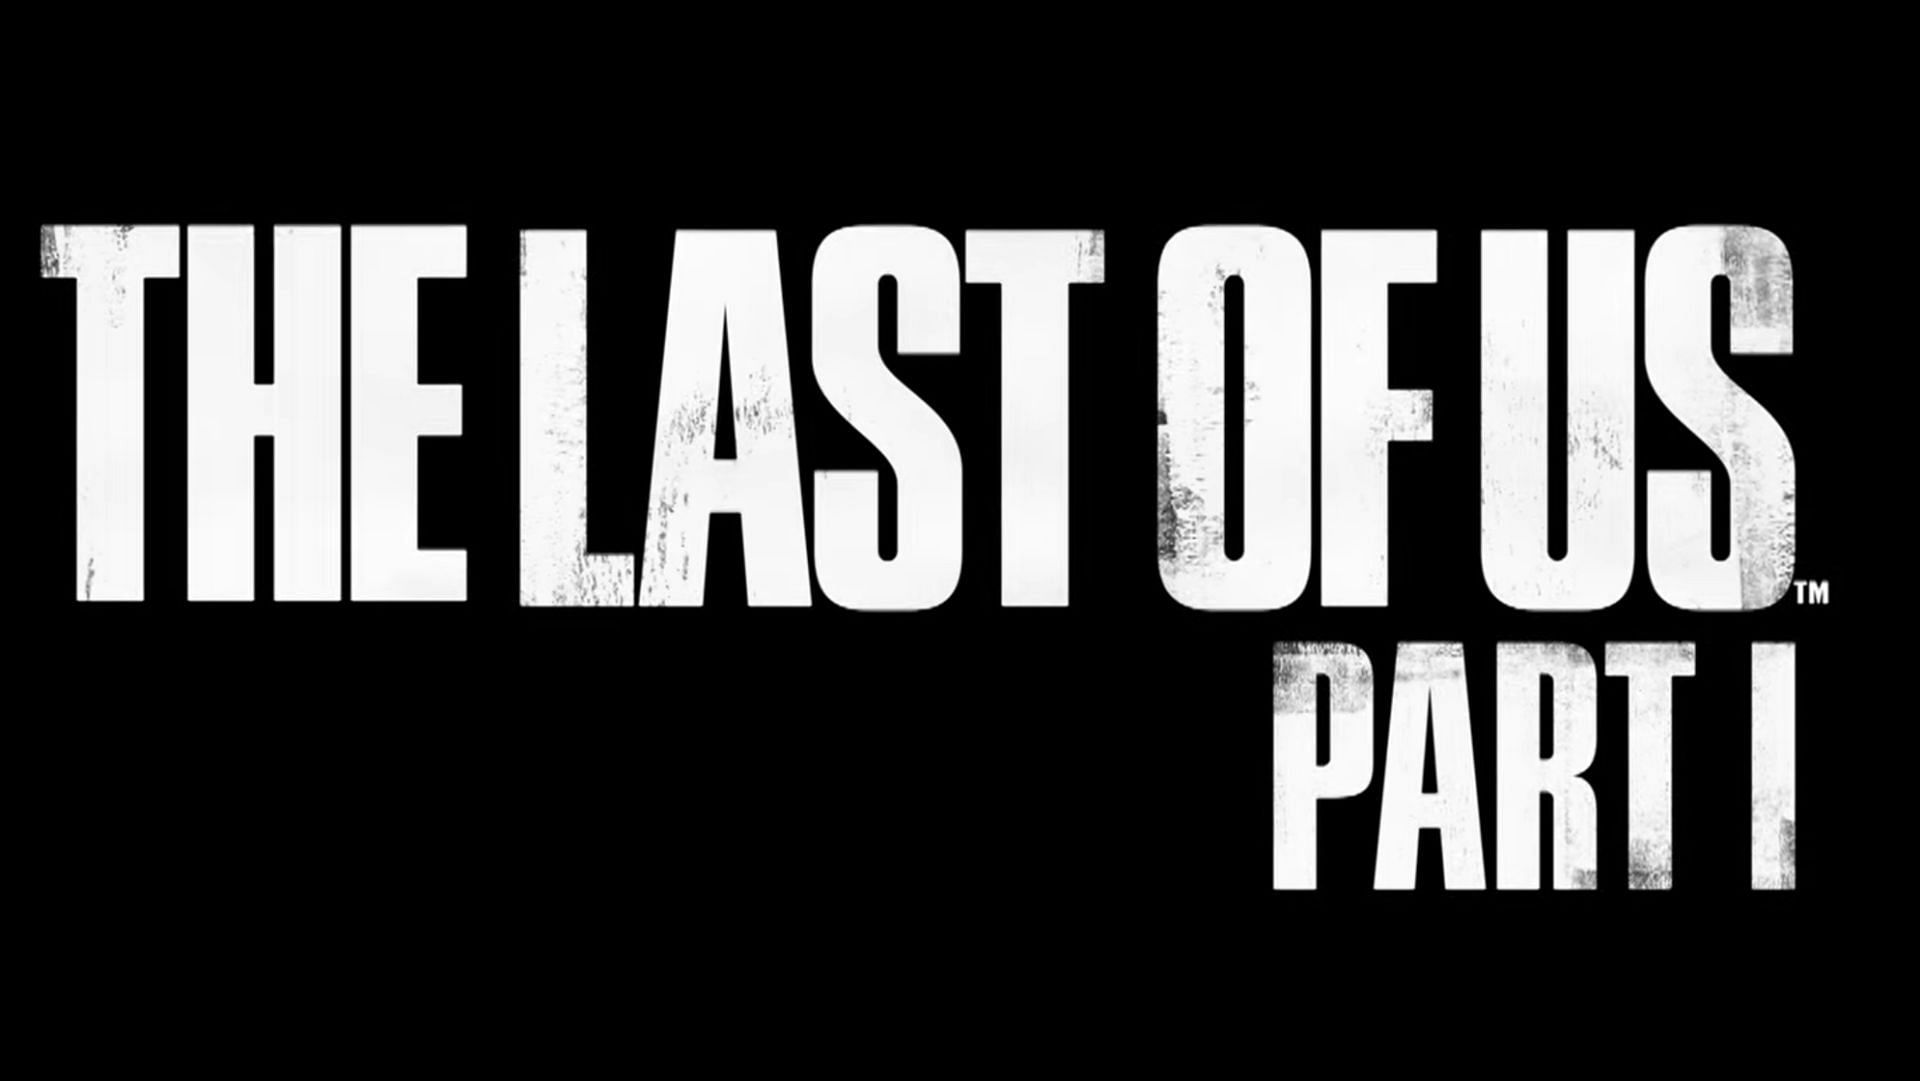 The Last Of Us Part 1 PC Release Date Confirmed